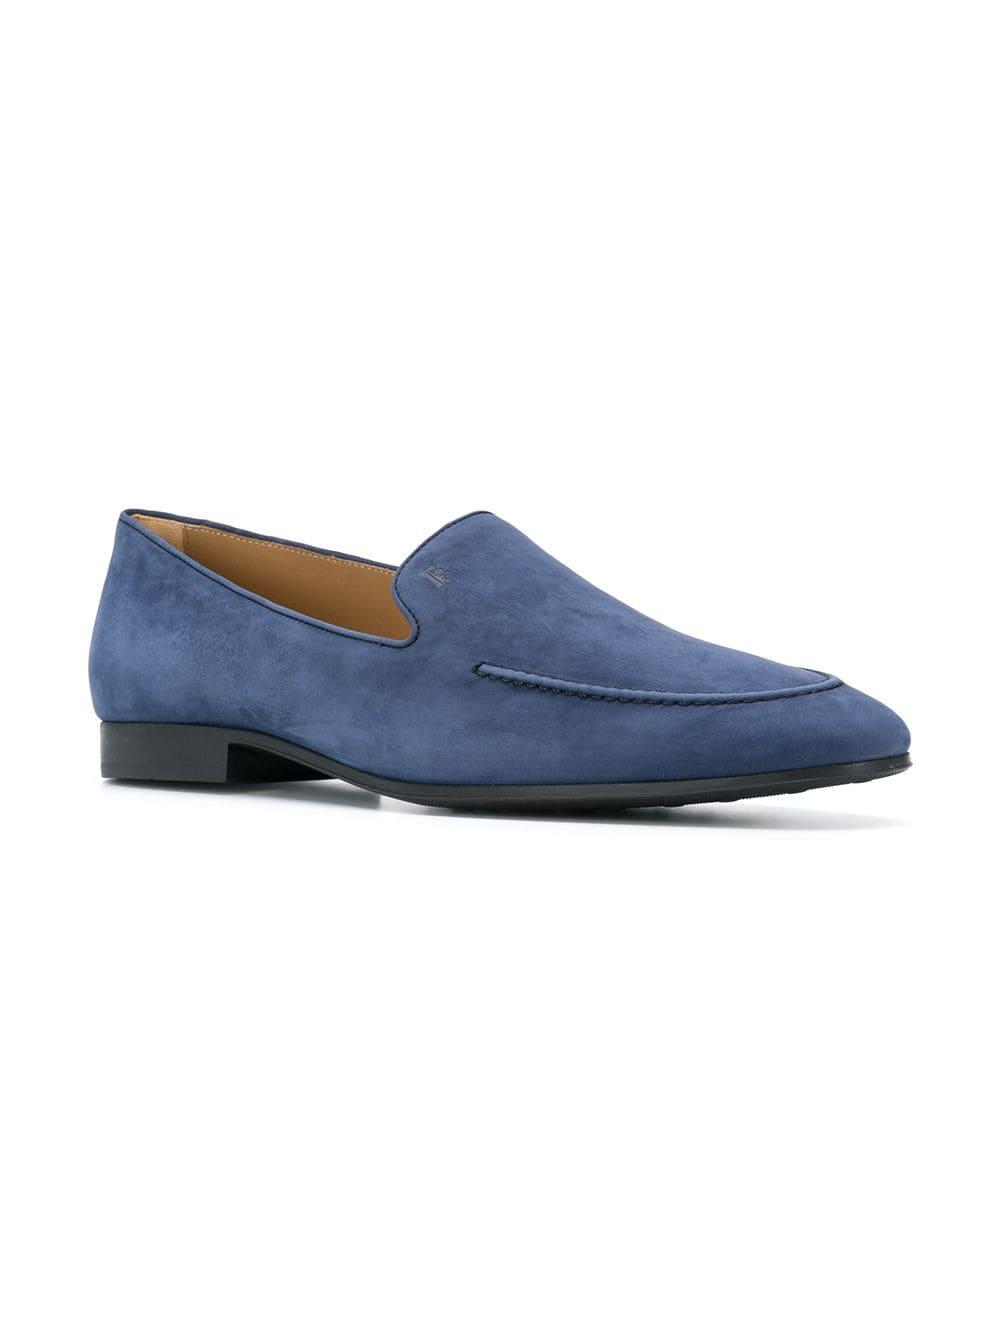 Tod's Suede Slip-on Loafers in Blue for Men - Lyst